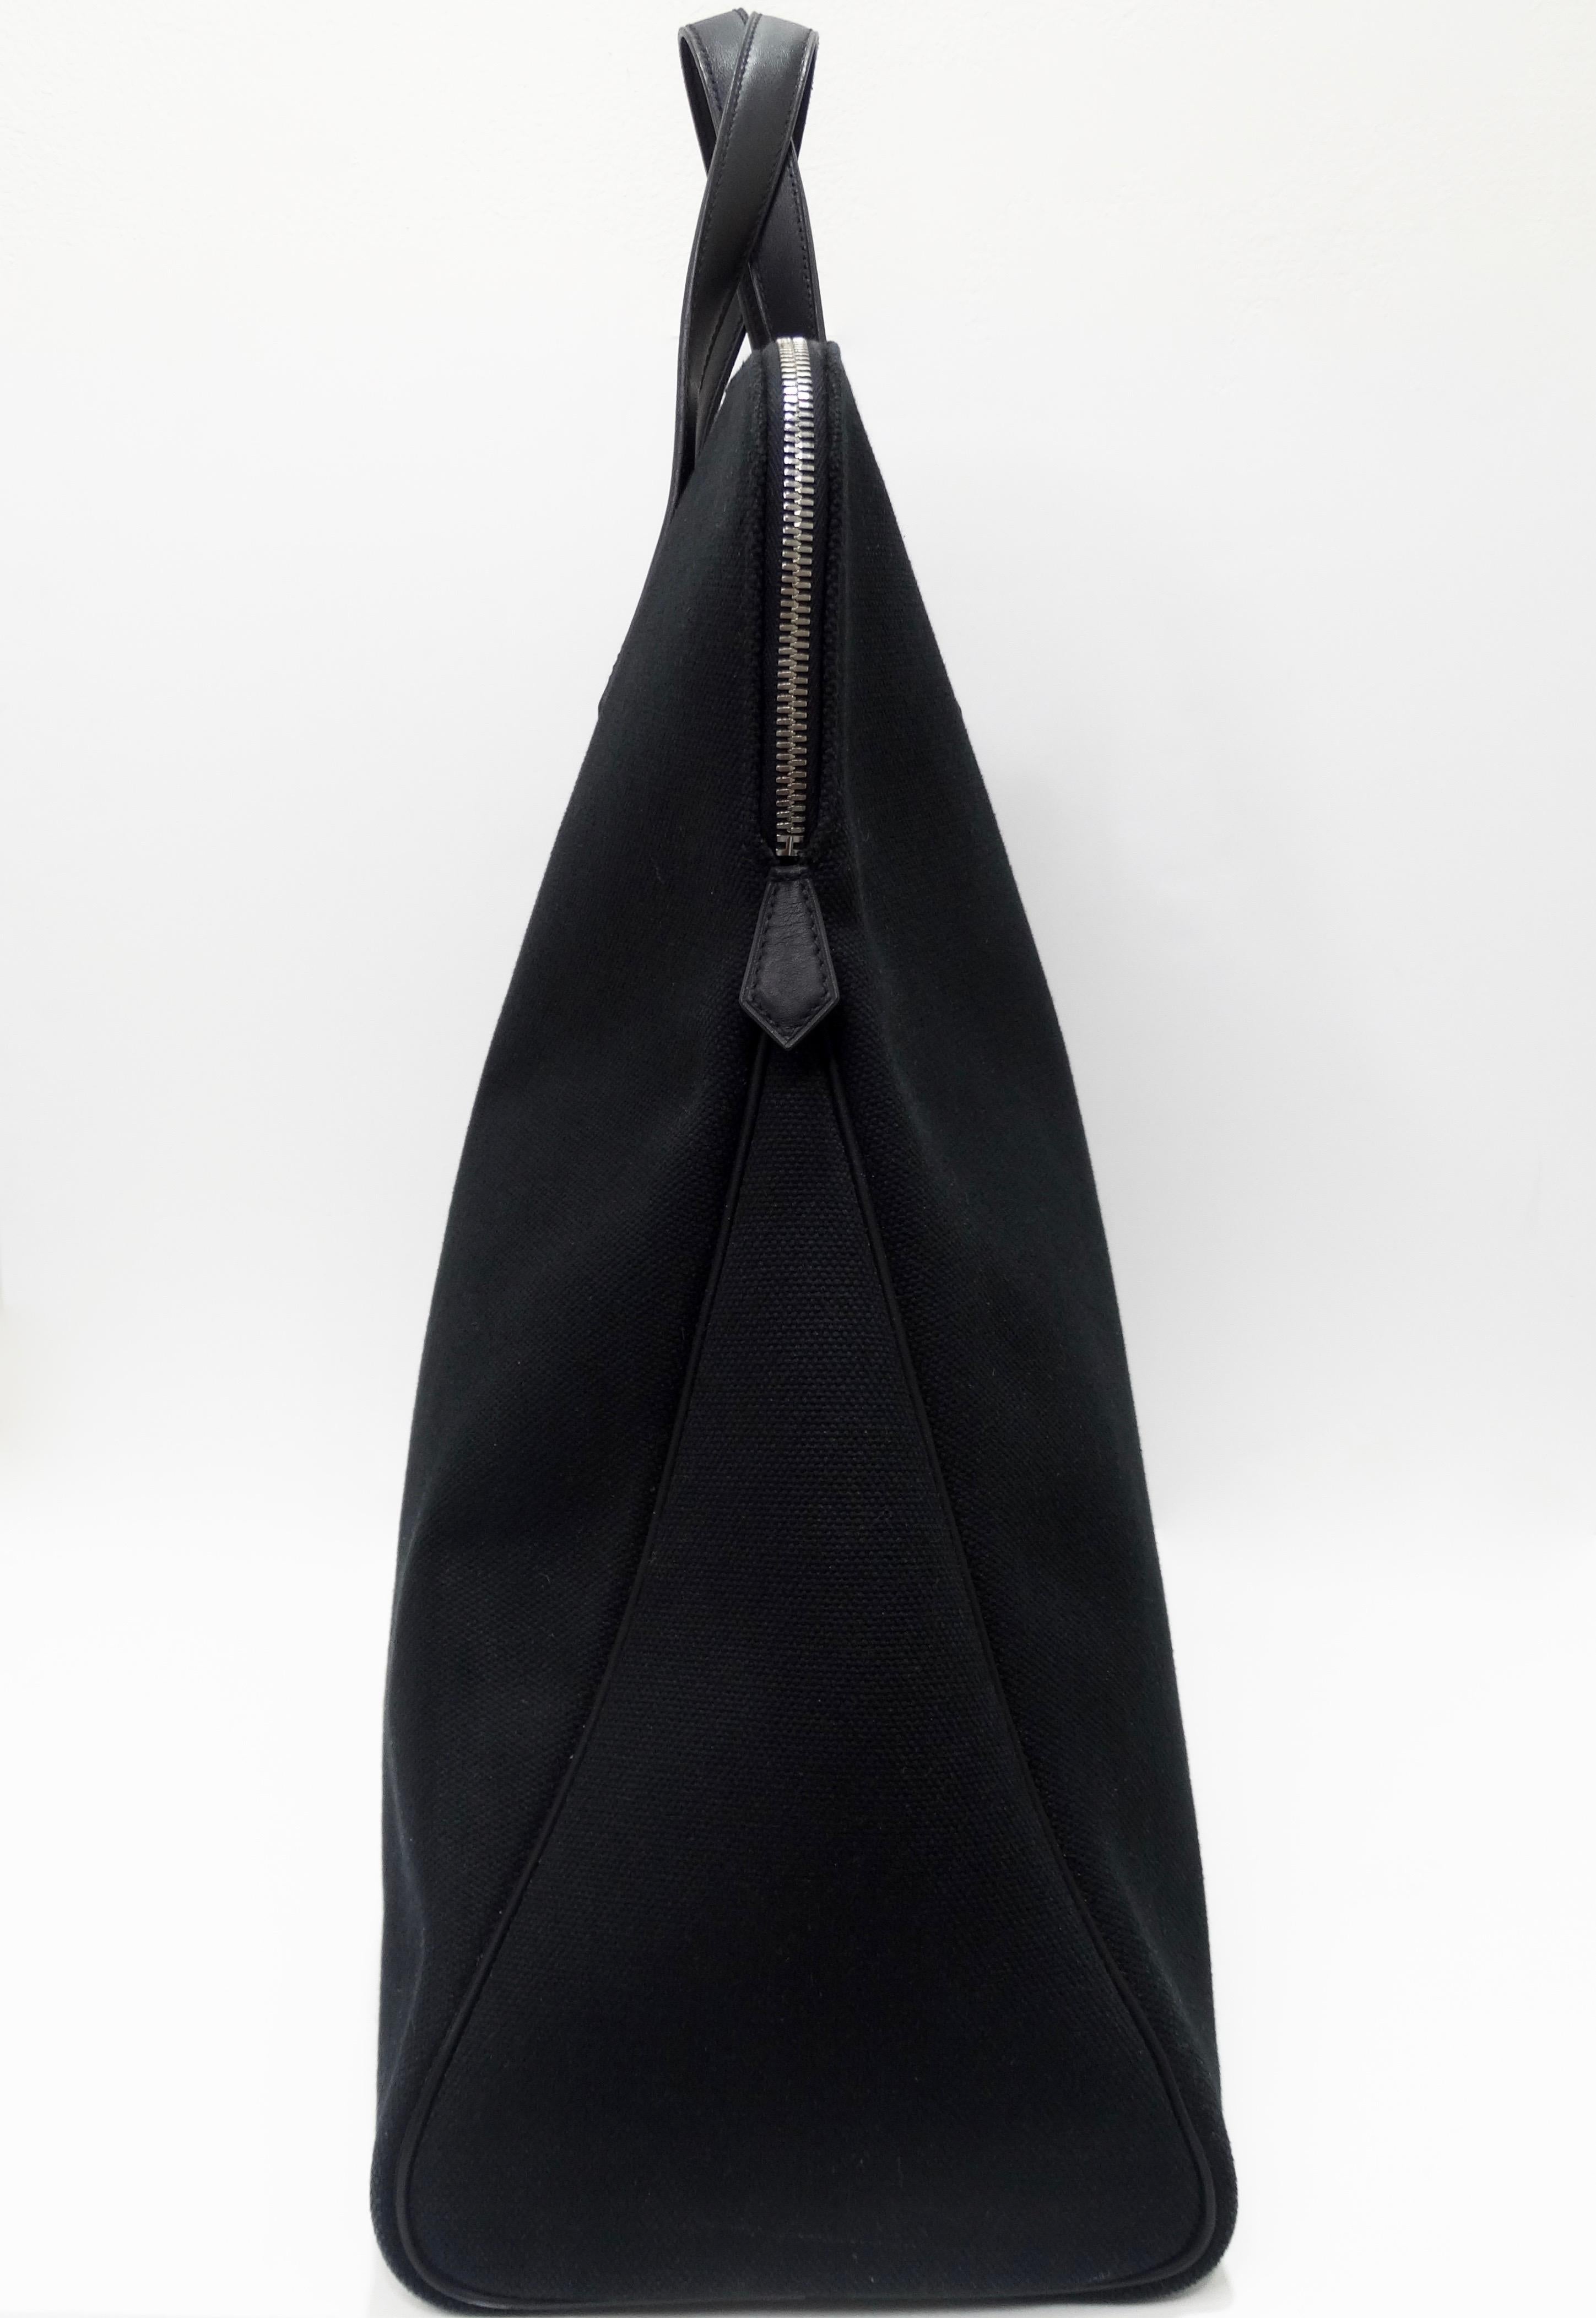 Hello Hermés lovers! Circa 2006, this large travel tote is crafted from black canvas and features pristine black stitching, dual black leather top handles with circle cutouts, black leather pipping, silver tone hardware and a top zipper closure with